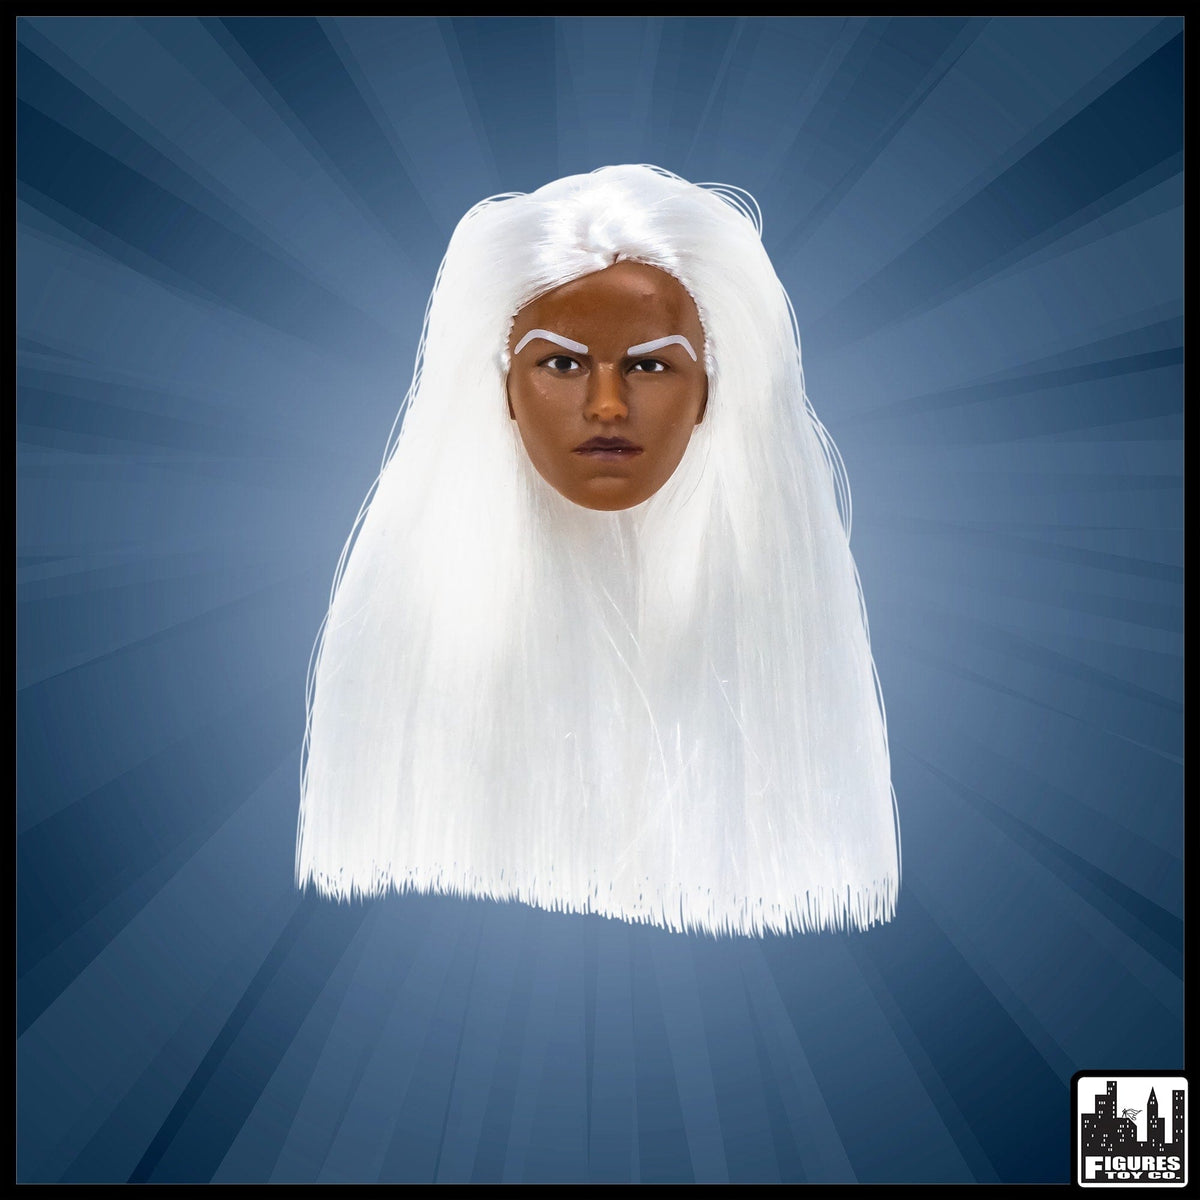 African American FEMALE Interchangeable Wrestling Action Figure Head With Long White Hair